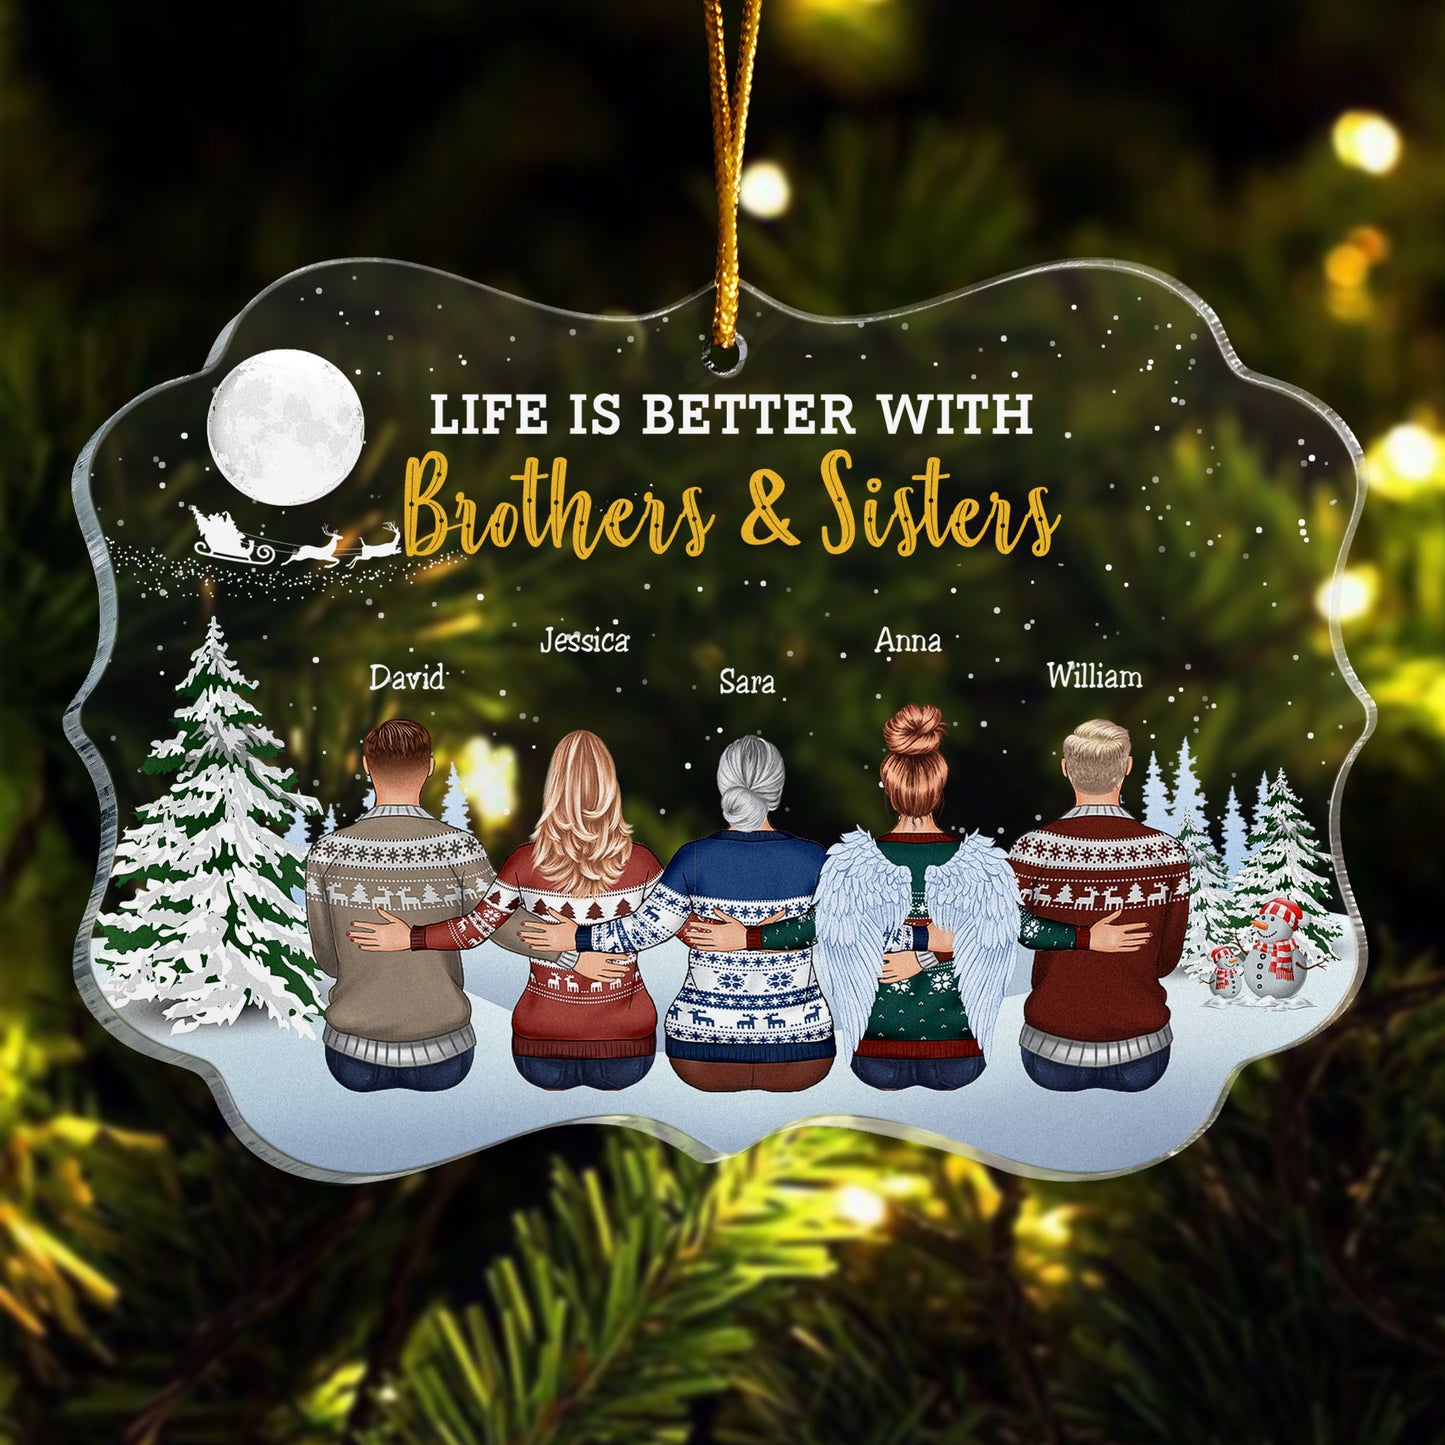 The Greatest Gift Our Parents Gave Us Was Each Other - Up To 10 People - Personalized Acrylic Ornament